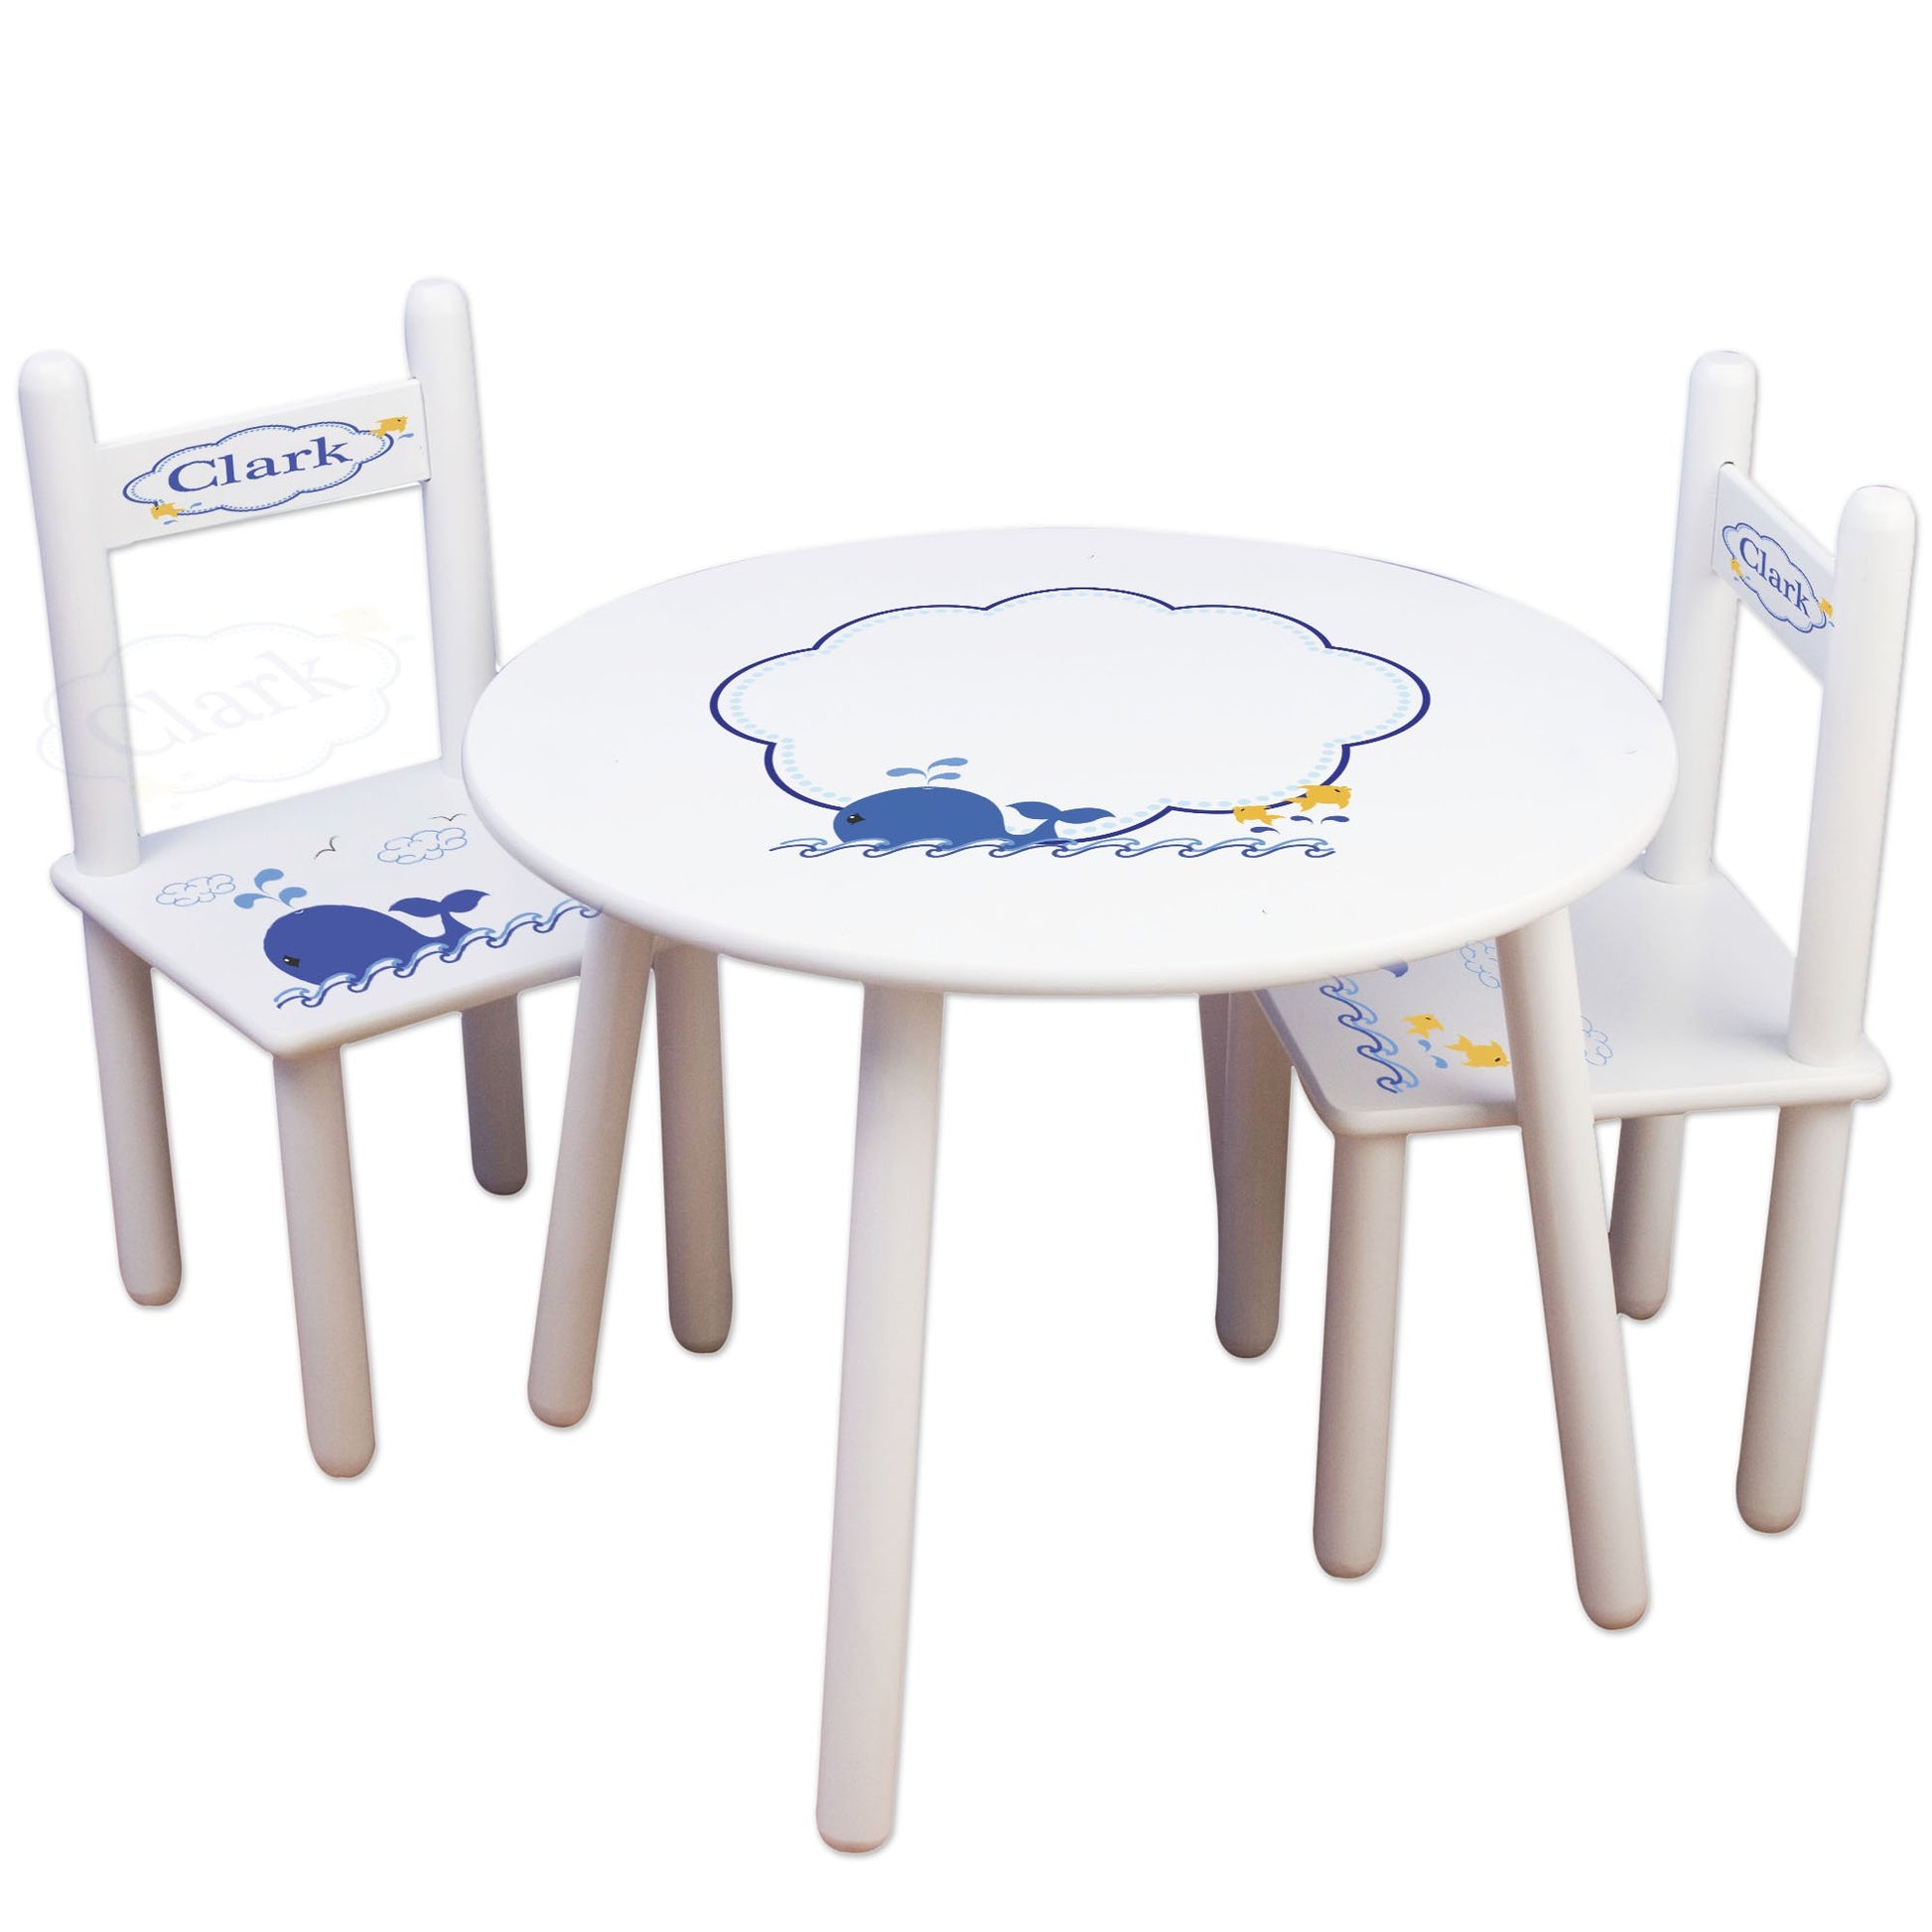 Personalized Table and Chairs with Pink Puppy design